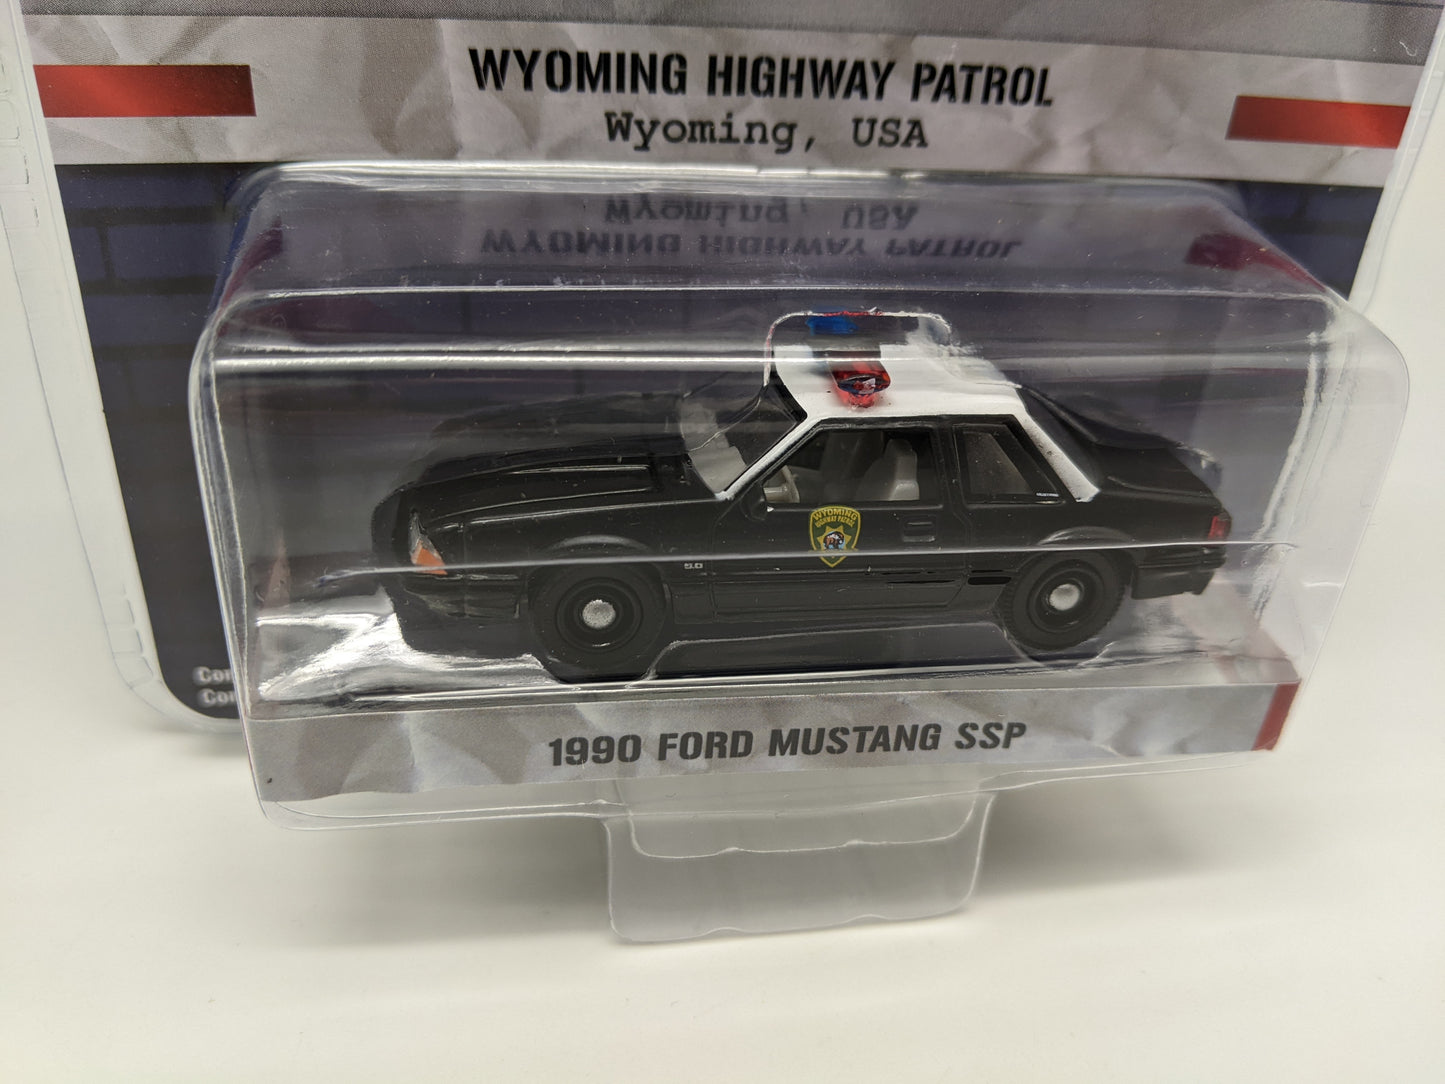 GL - 1990 Ford Mustang SSP - Wyoming Highway Patrol - Hot Pursuit